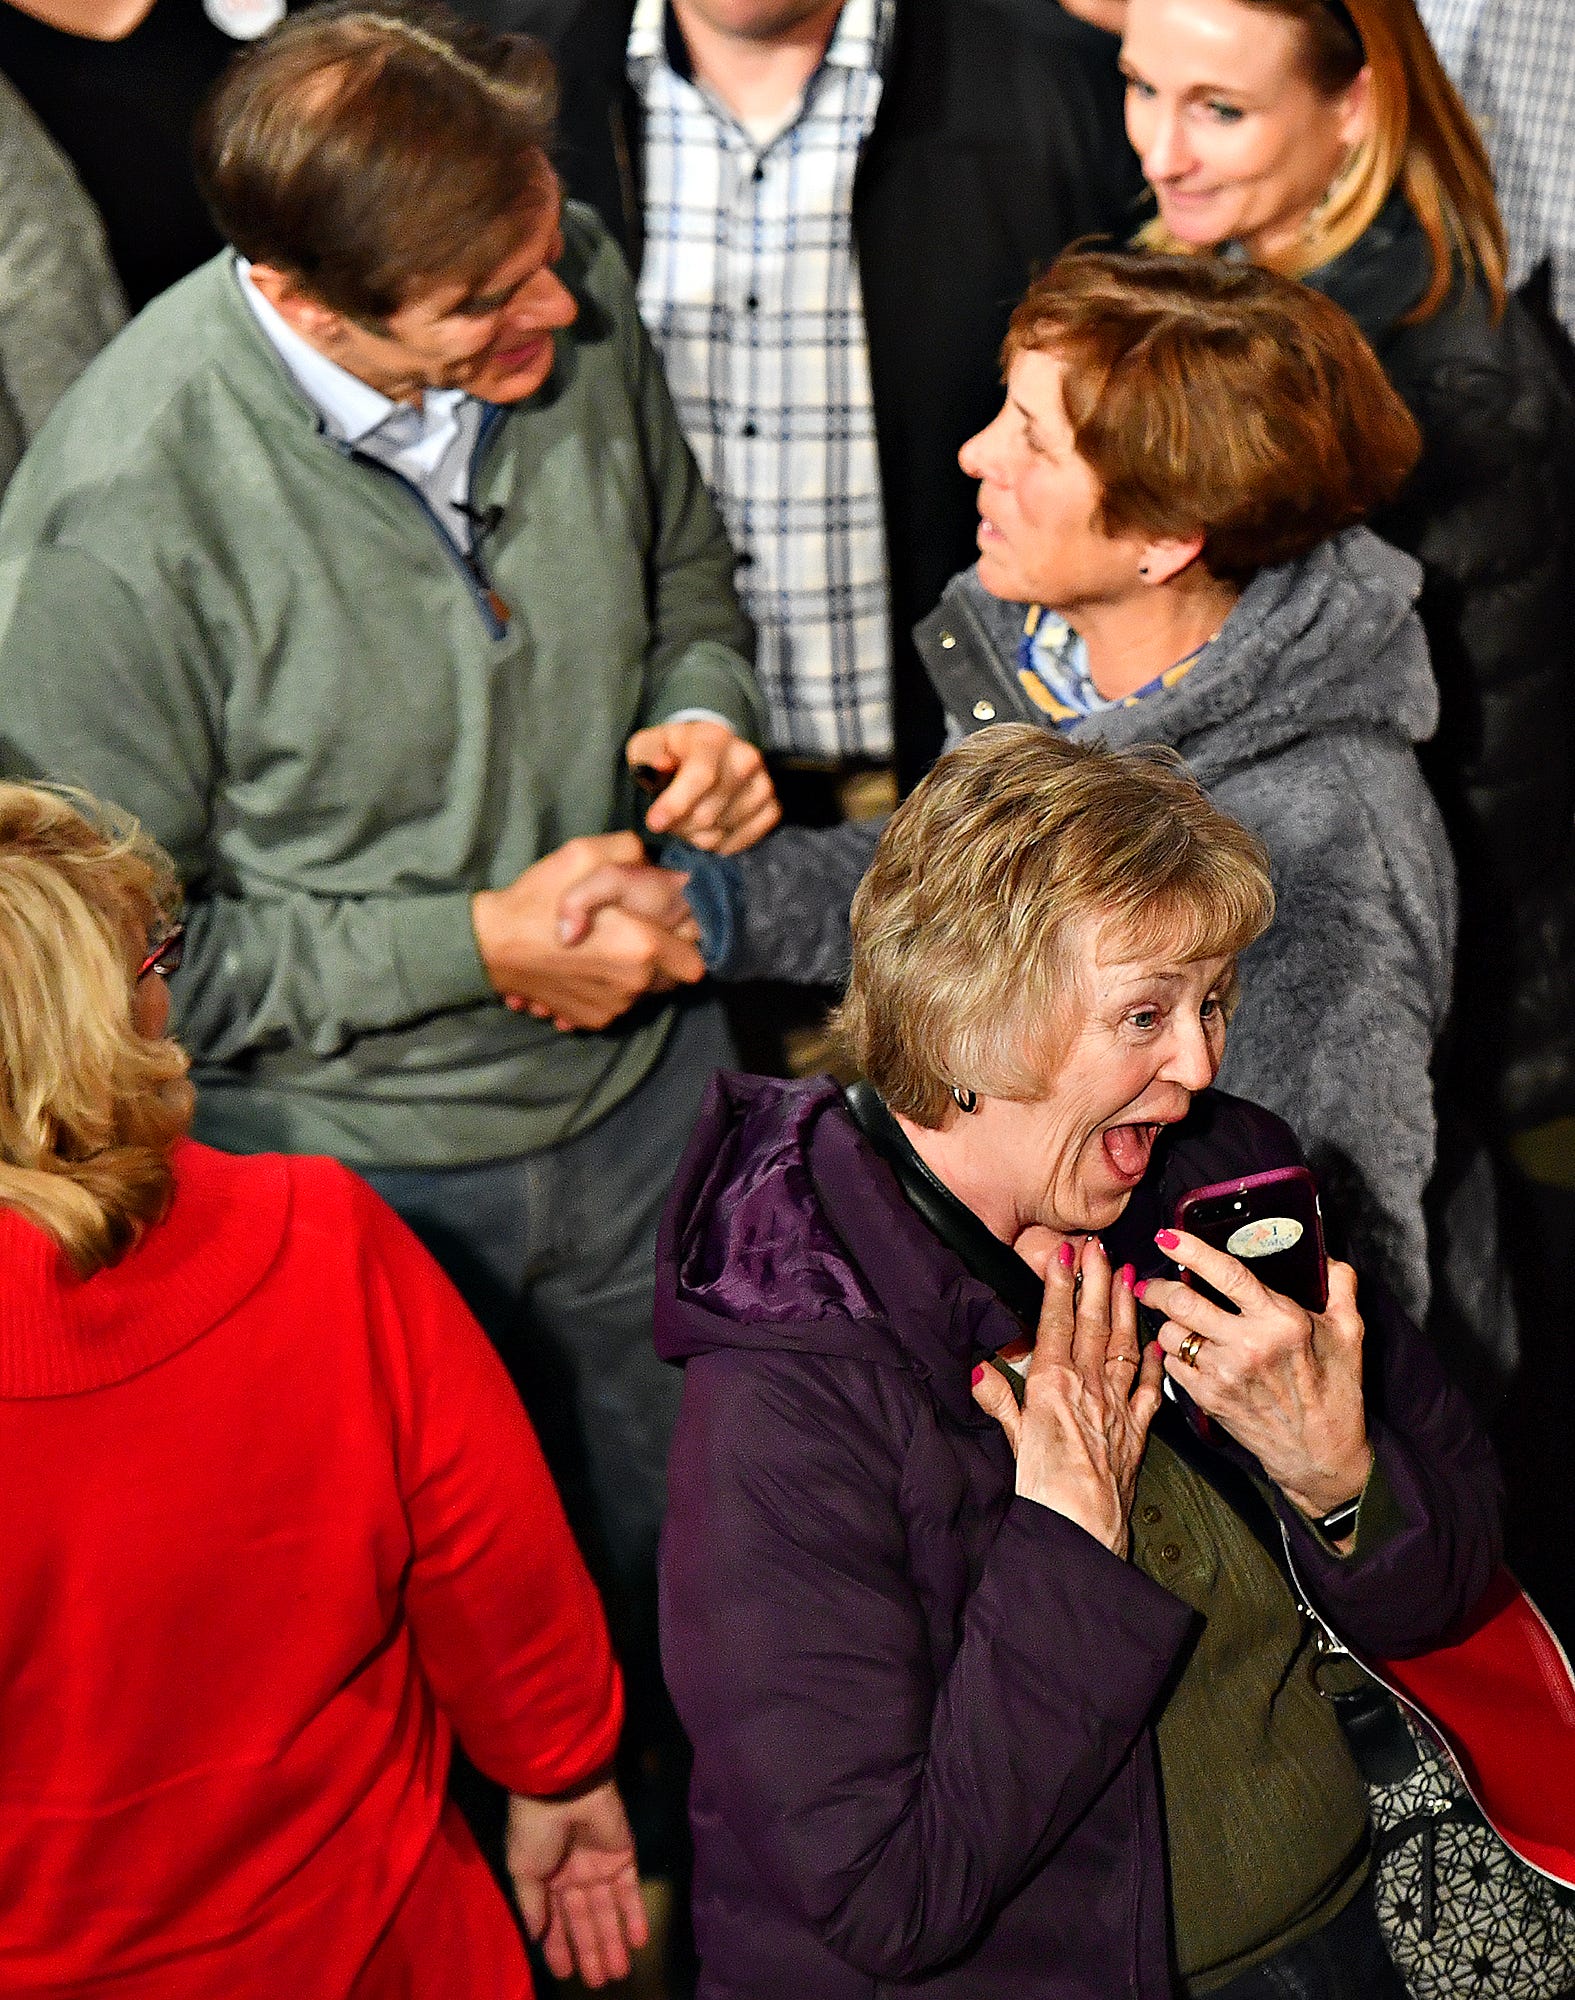 Carol Bair, front, of Manchester Township reacts after taking a selfie with Dr. Mehmet Oz, top left, while Oz greets Rosa Hickey, of West Manchester Township, following the Doctor Oz for Senate campaign event at Wisehaven Event Center in Windsor Township, Saturday, Feb. 5, 2022. Dawn J. Sagert photo